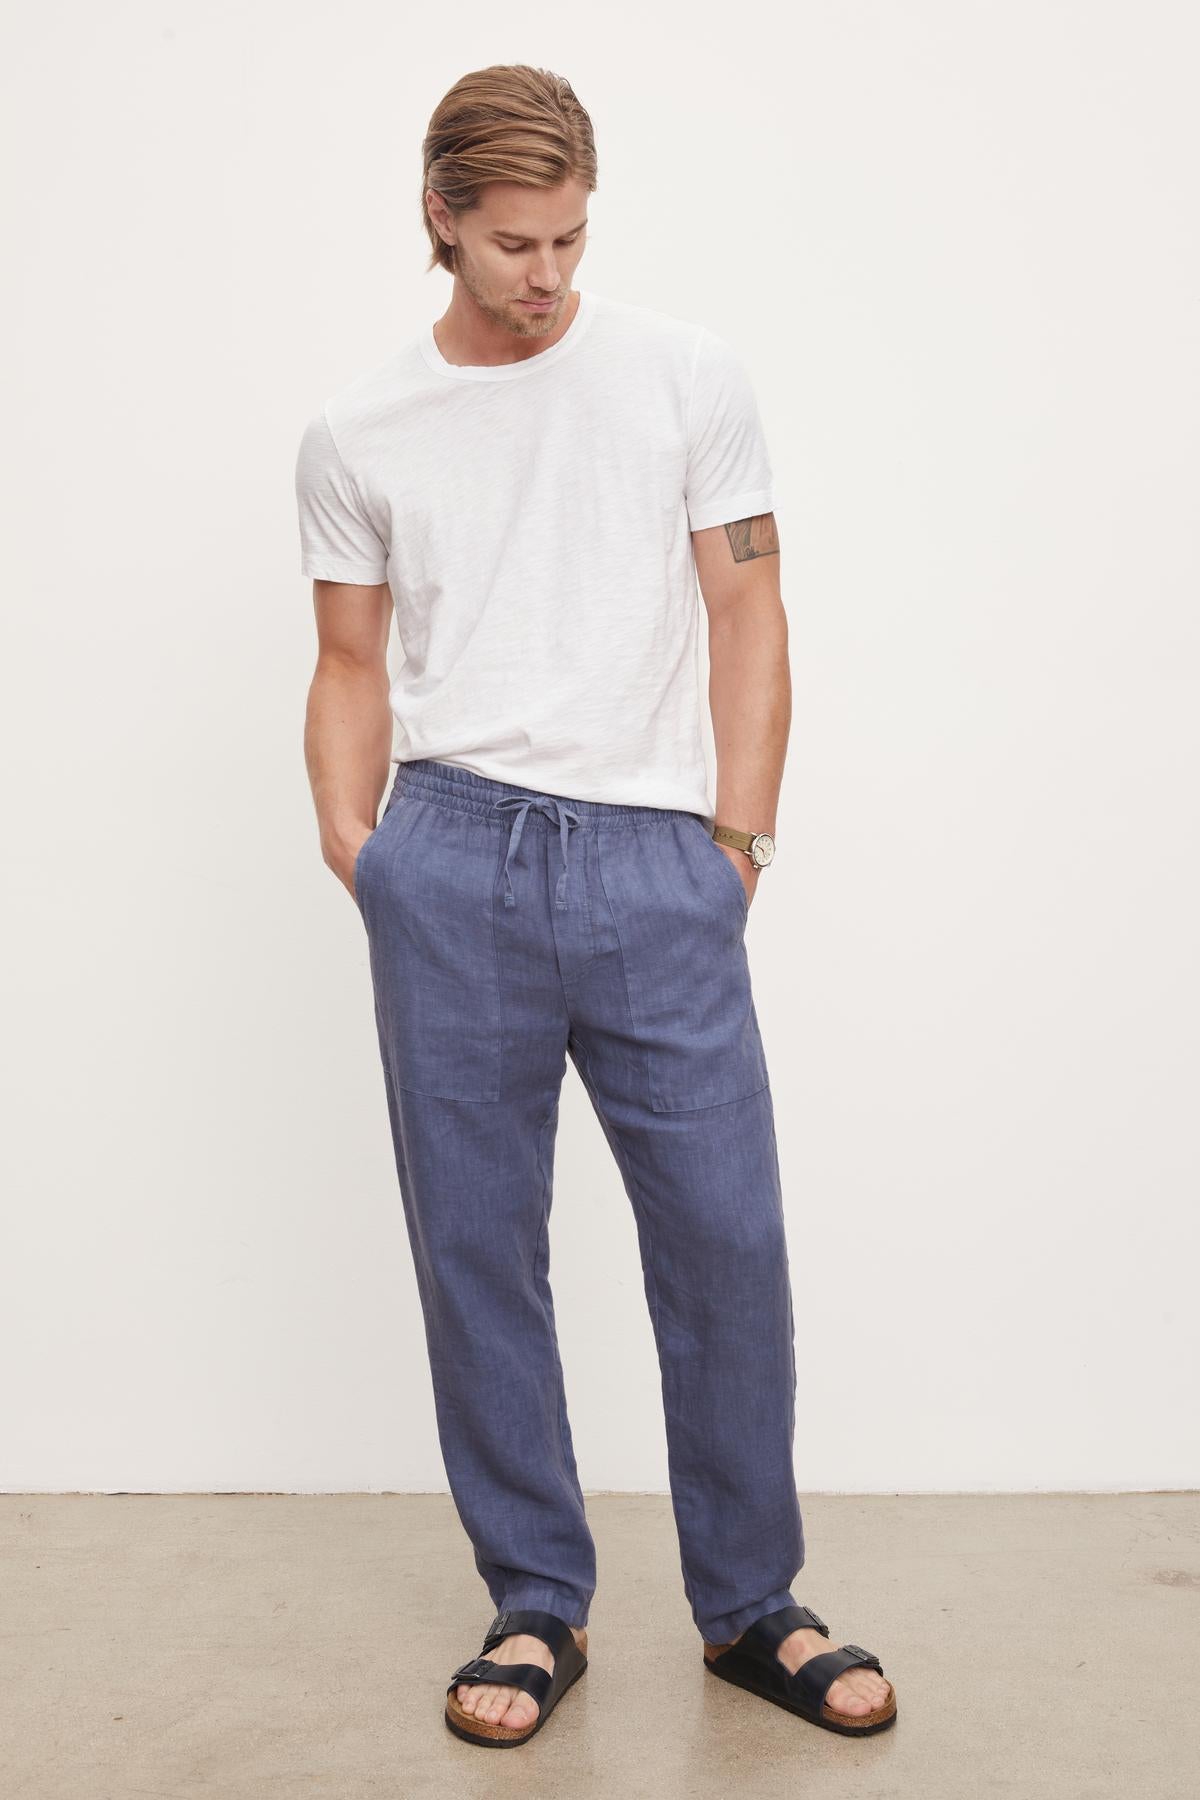   A man wearing a white t-shirt, Velvet by Graham & Spencer blue Phelan linen pants, and black sandals stands looking down, against a plain background. 